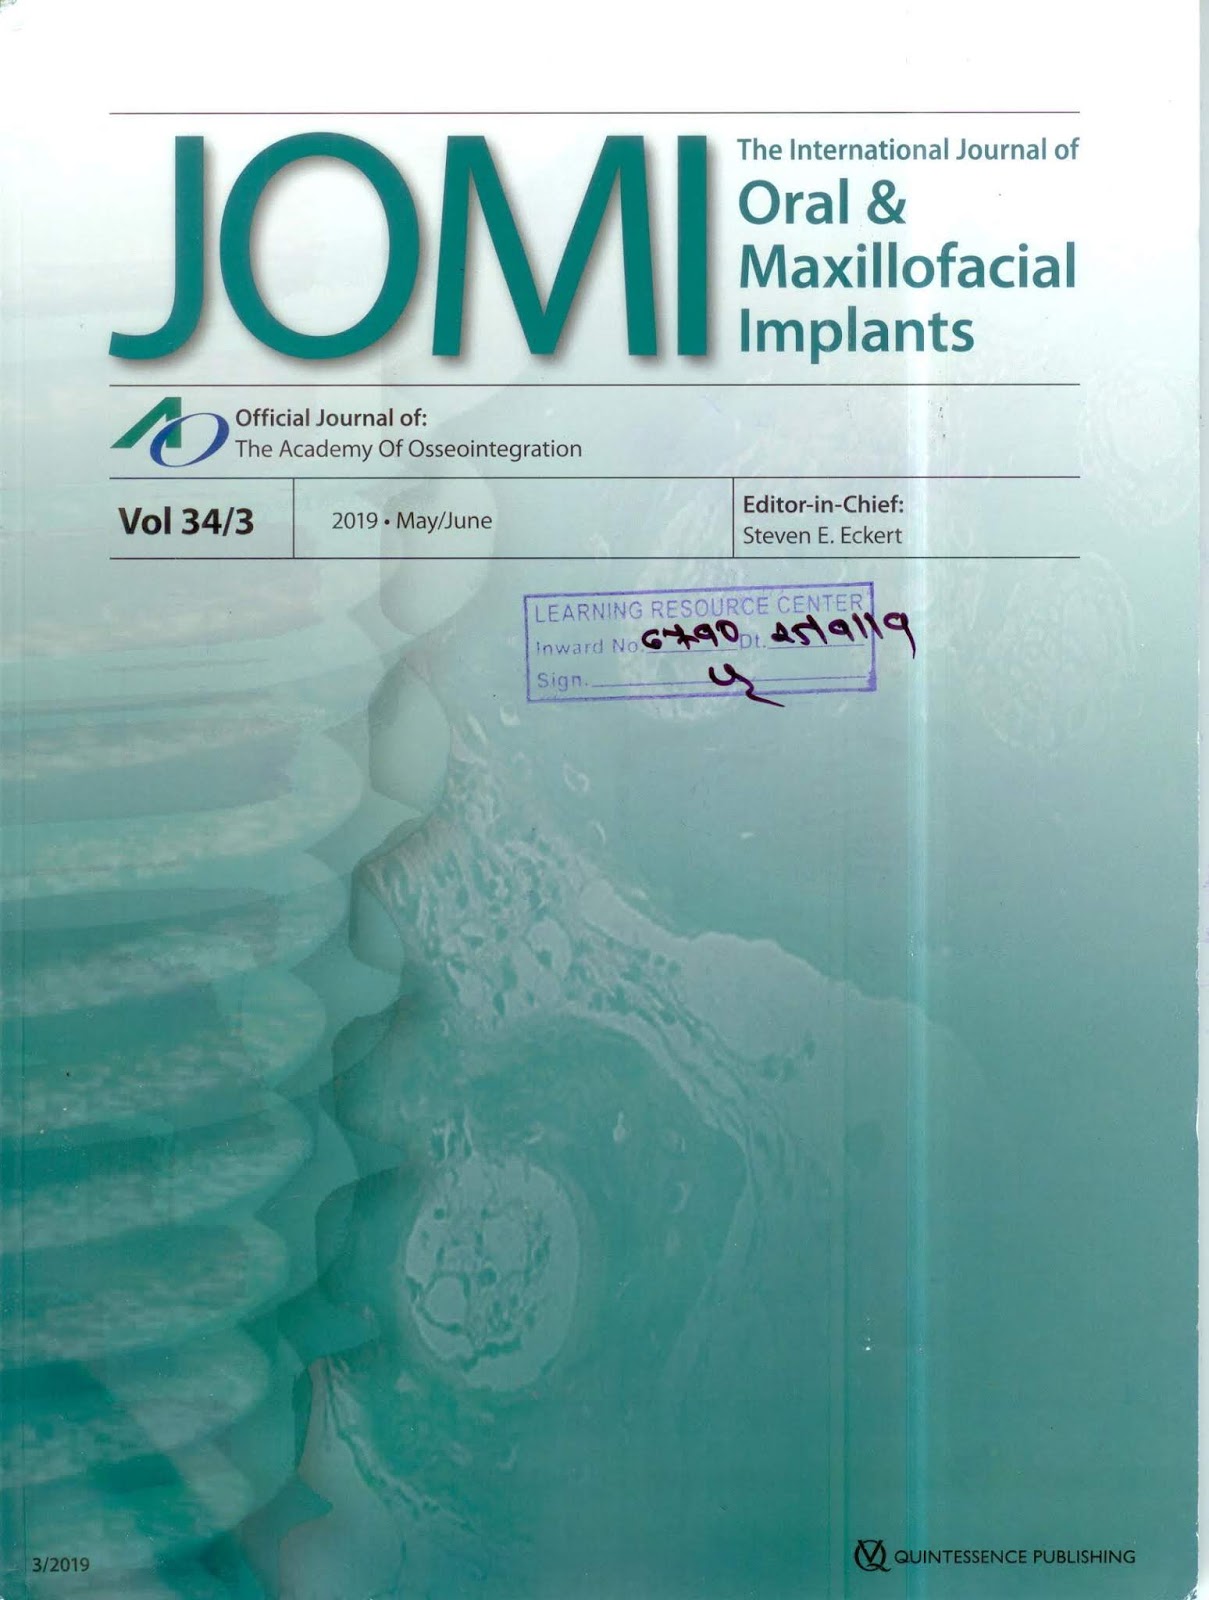 http://www.quintpub.com/journals/omi/journal_contents.php?iss_id=1607&journal_name=OMI&vol_year=2019&vol_num=34#.XYyNB7im_CM